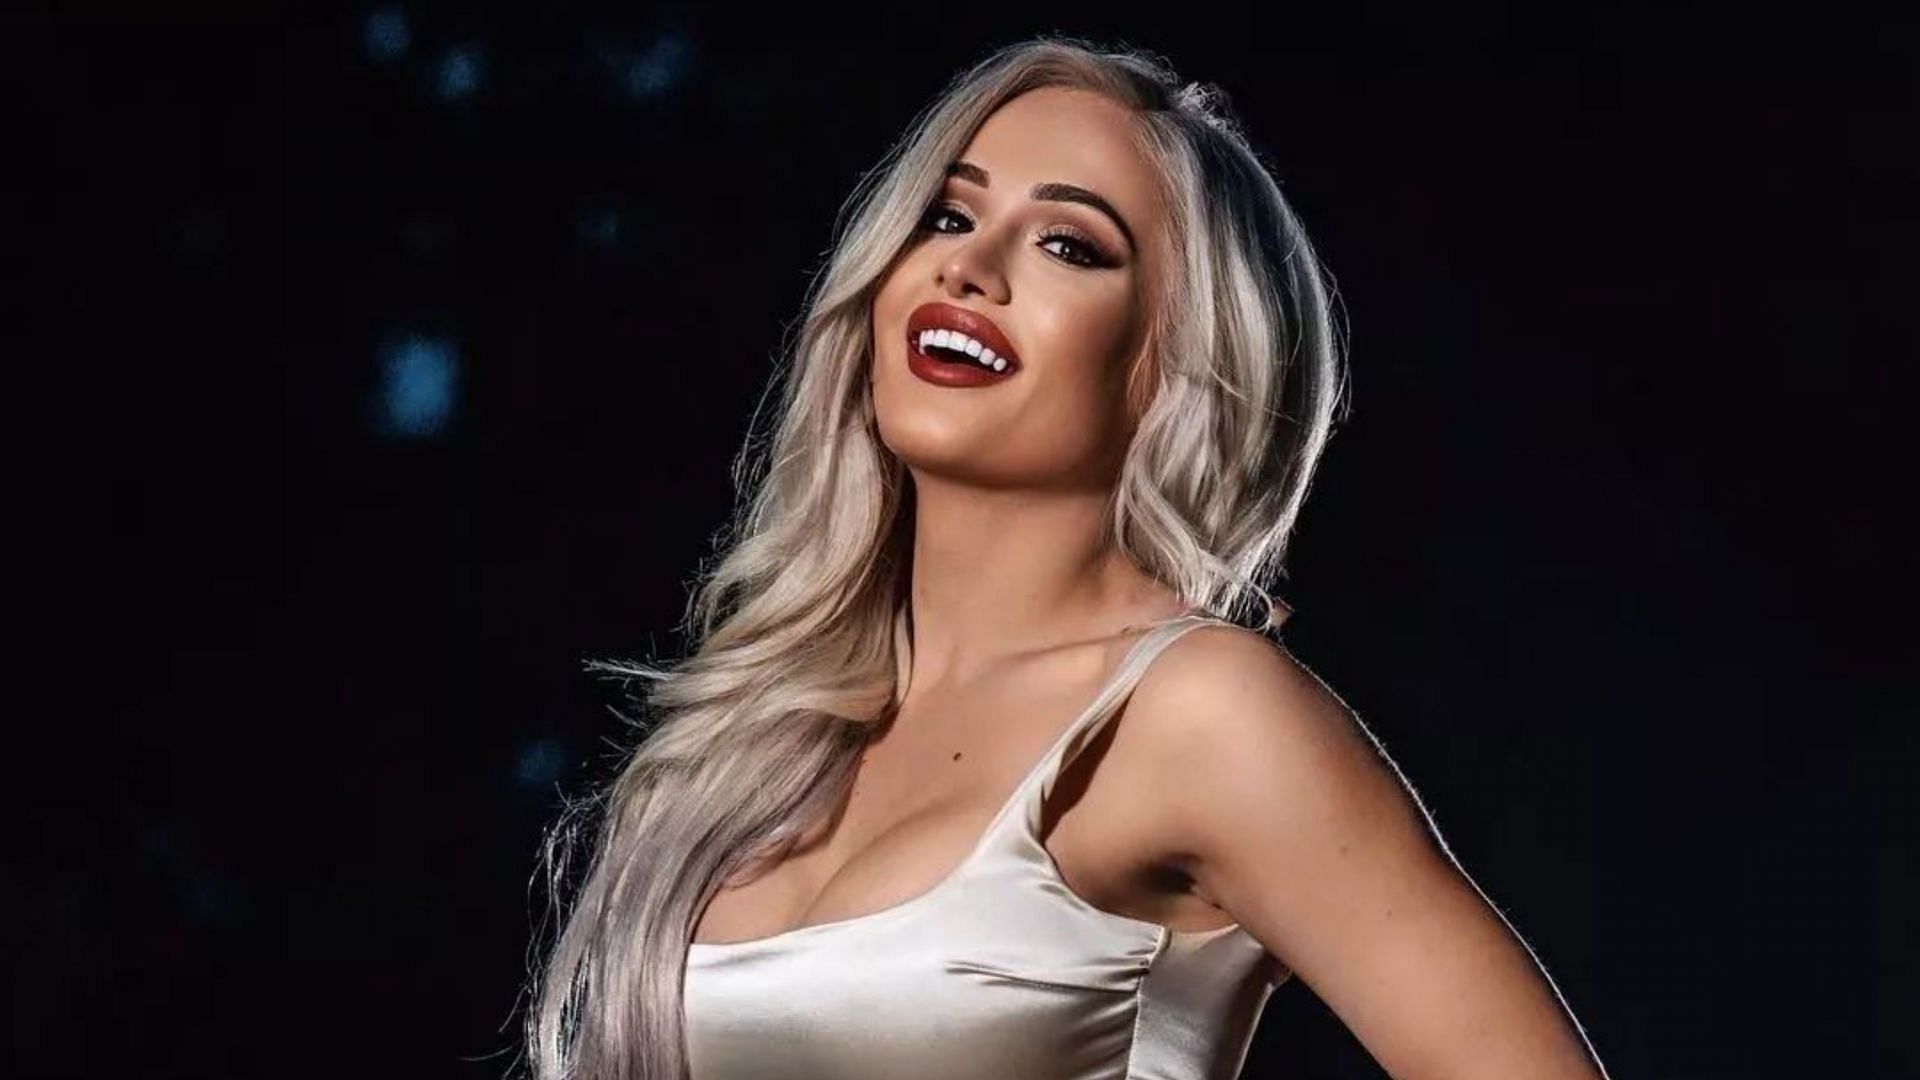 WWE Superstar Scarlett Bordeaux made an inappropriate request to fans